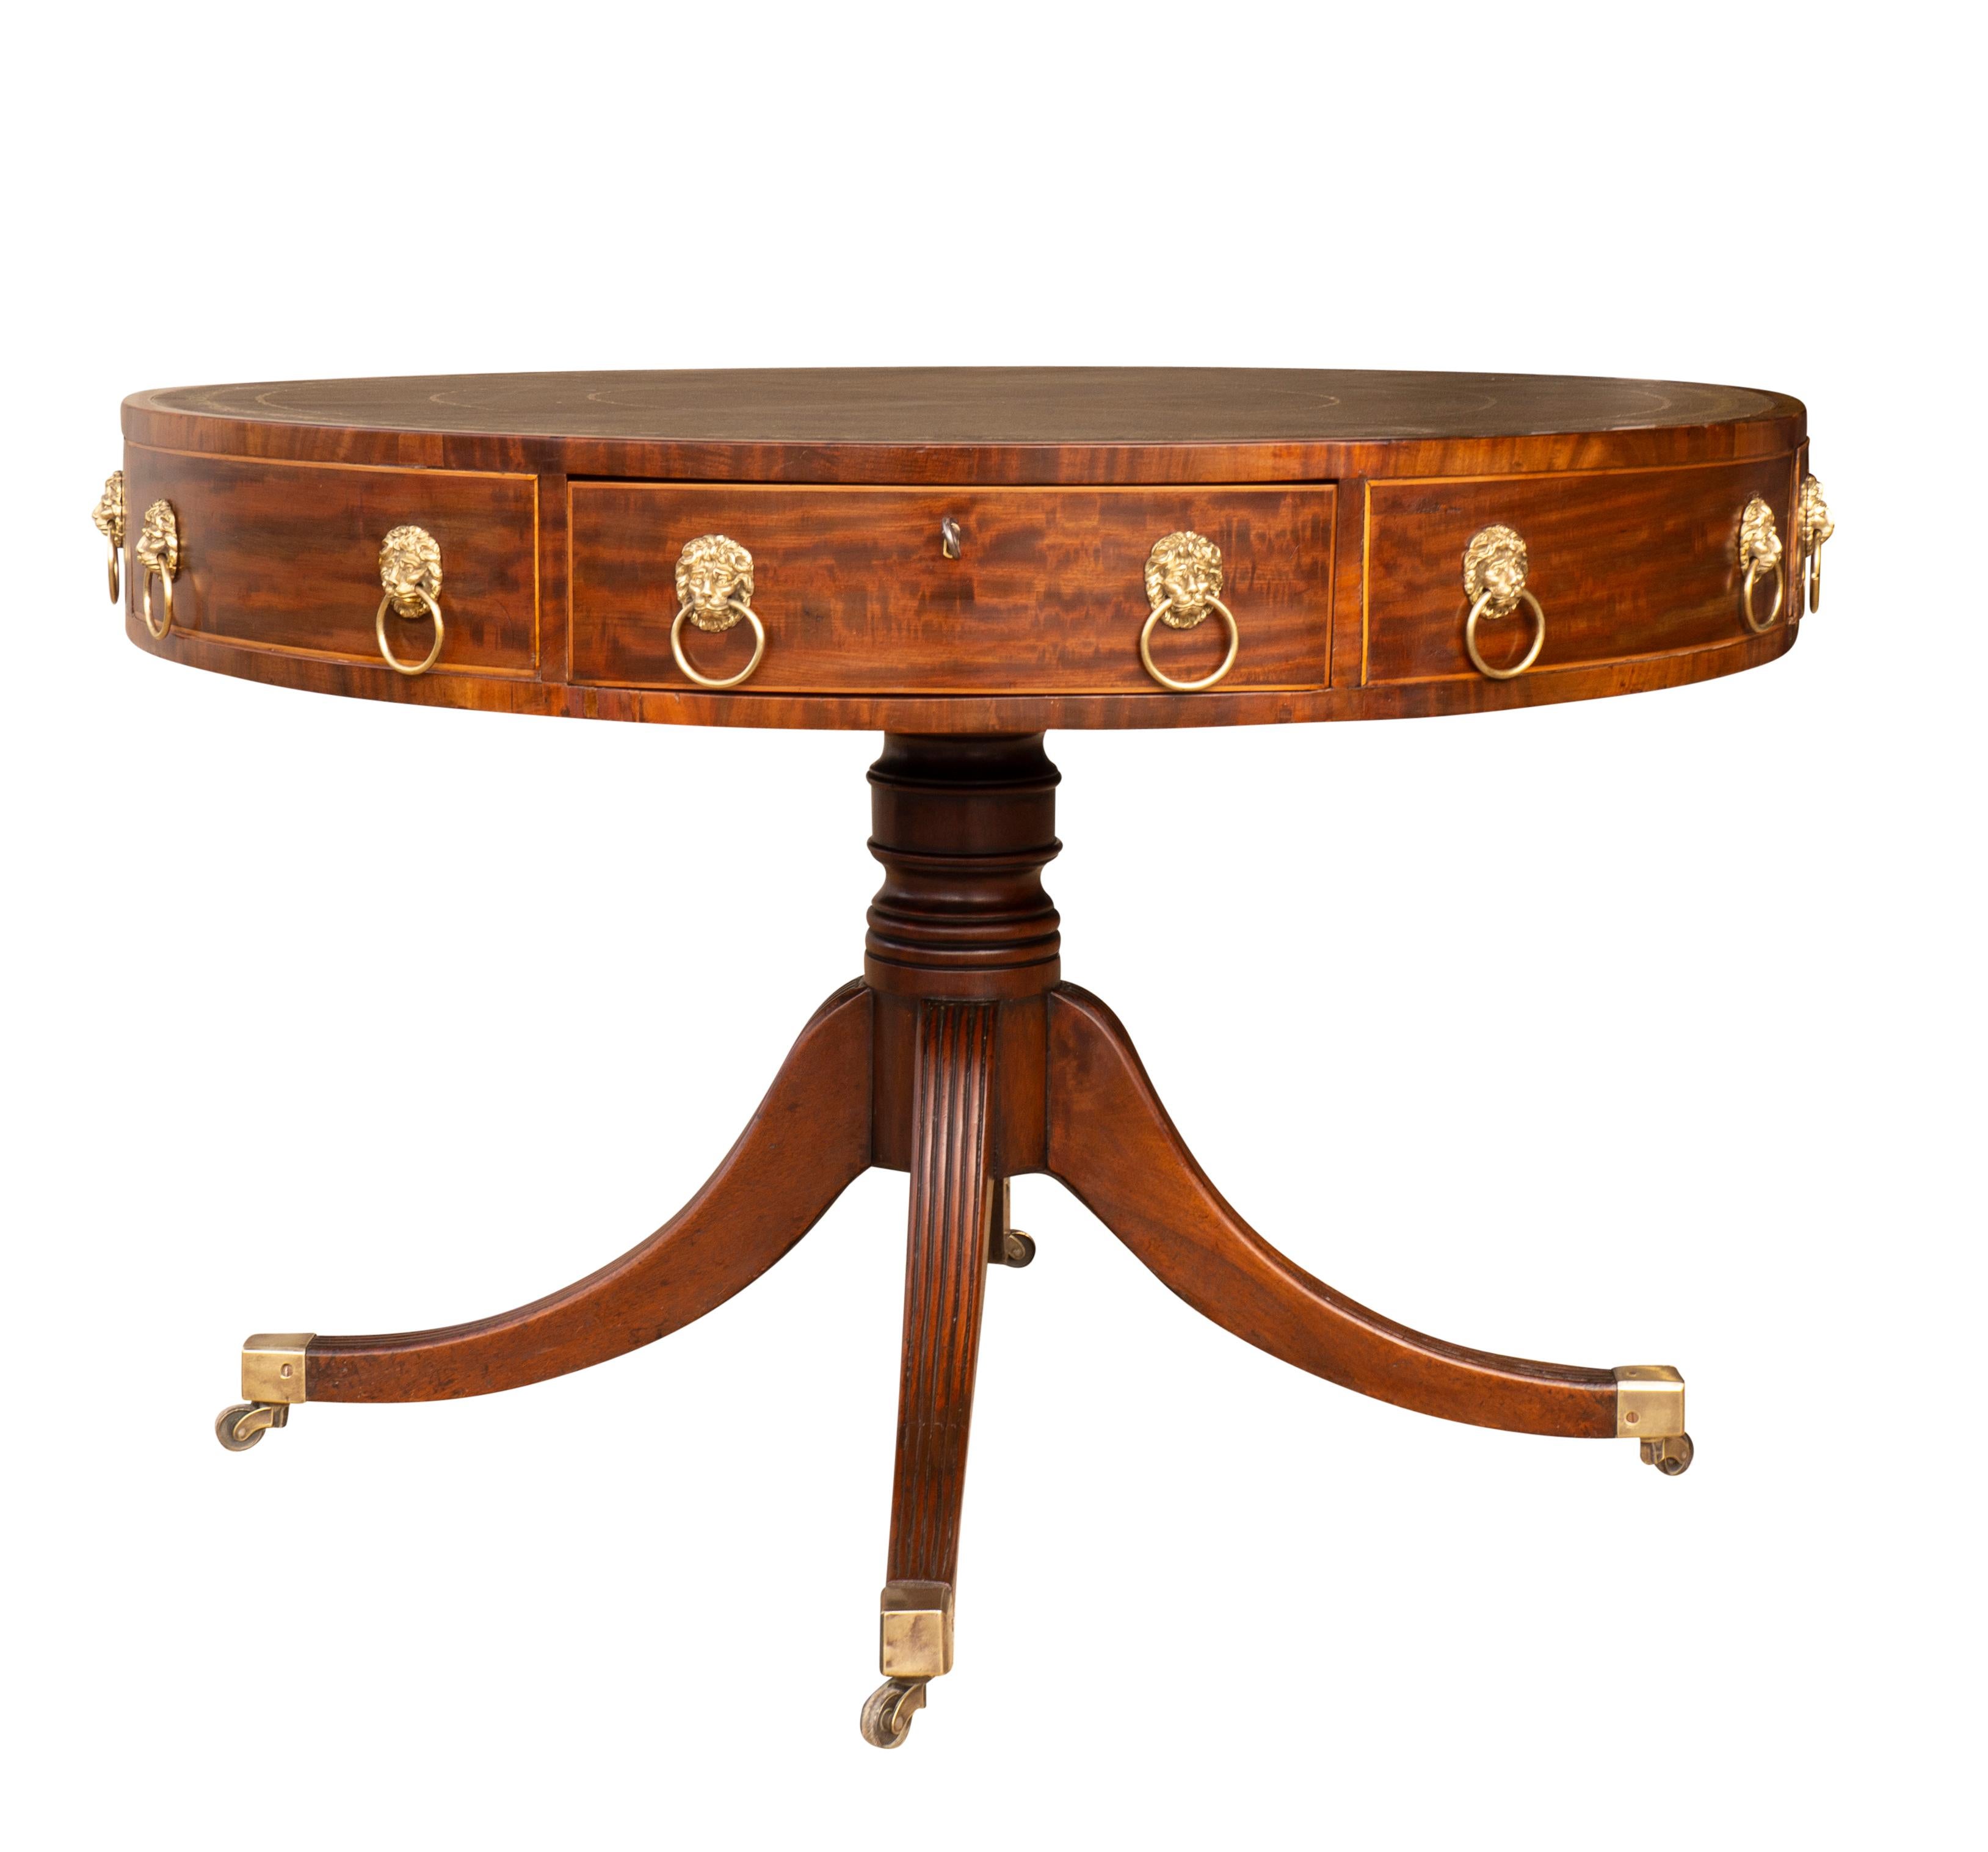 With a new circular green tooled leather top within a banded edge over conforming frieze with  alternating false and working drawers all with lions head drawer pulls, the elegantly proportioned base with turned support and four reeded saber legs